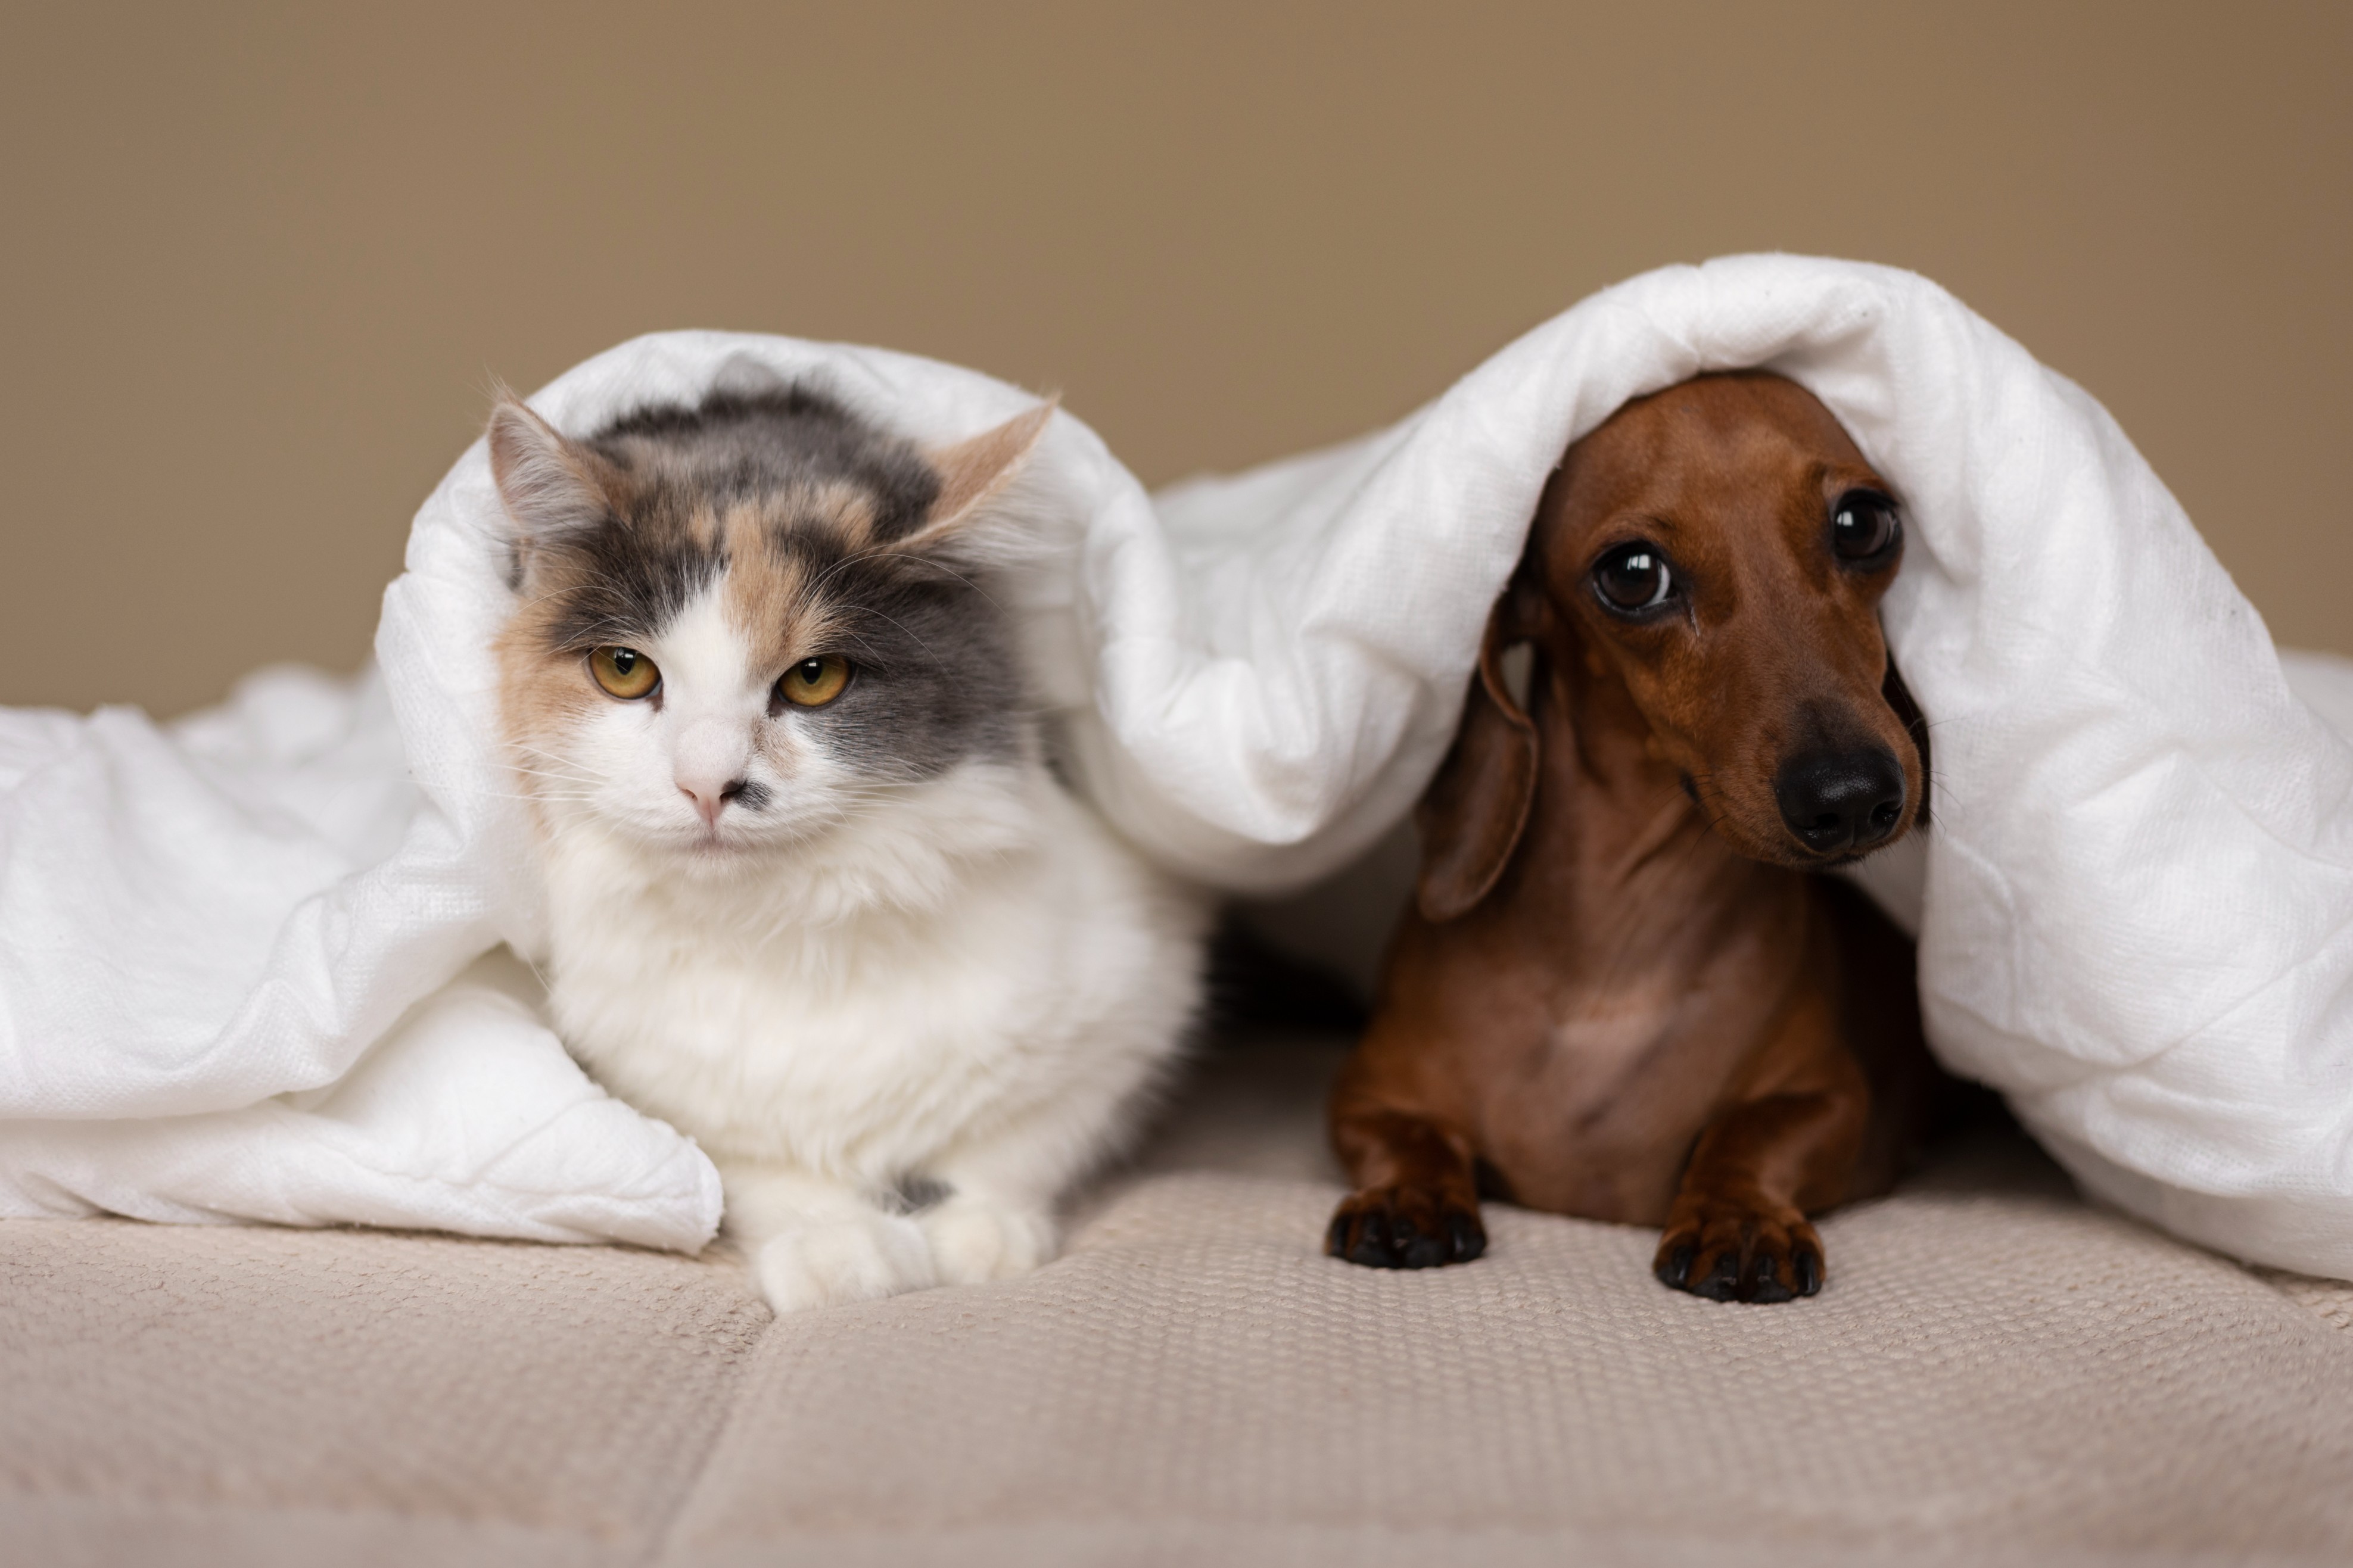 Picture of a dog and a cat under a blanket